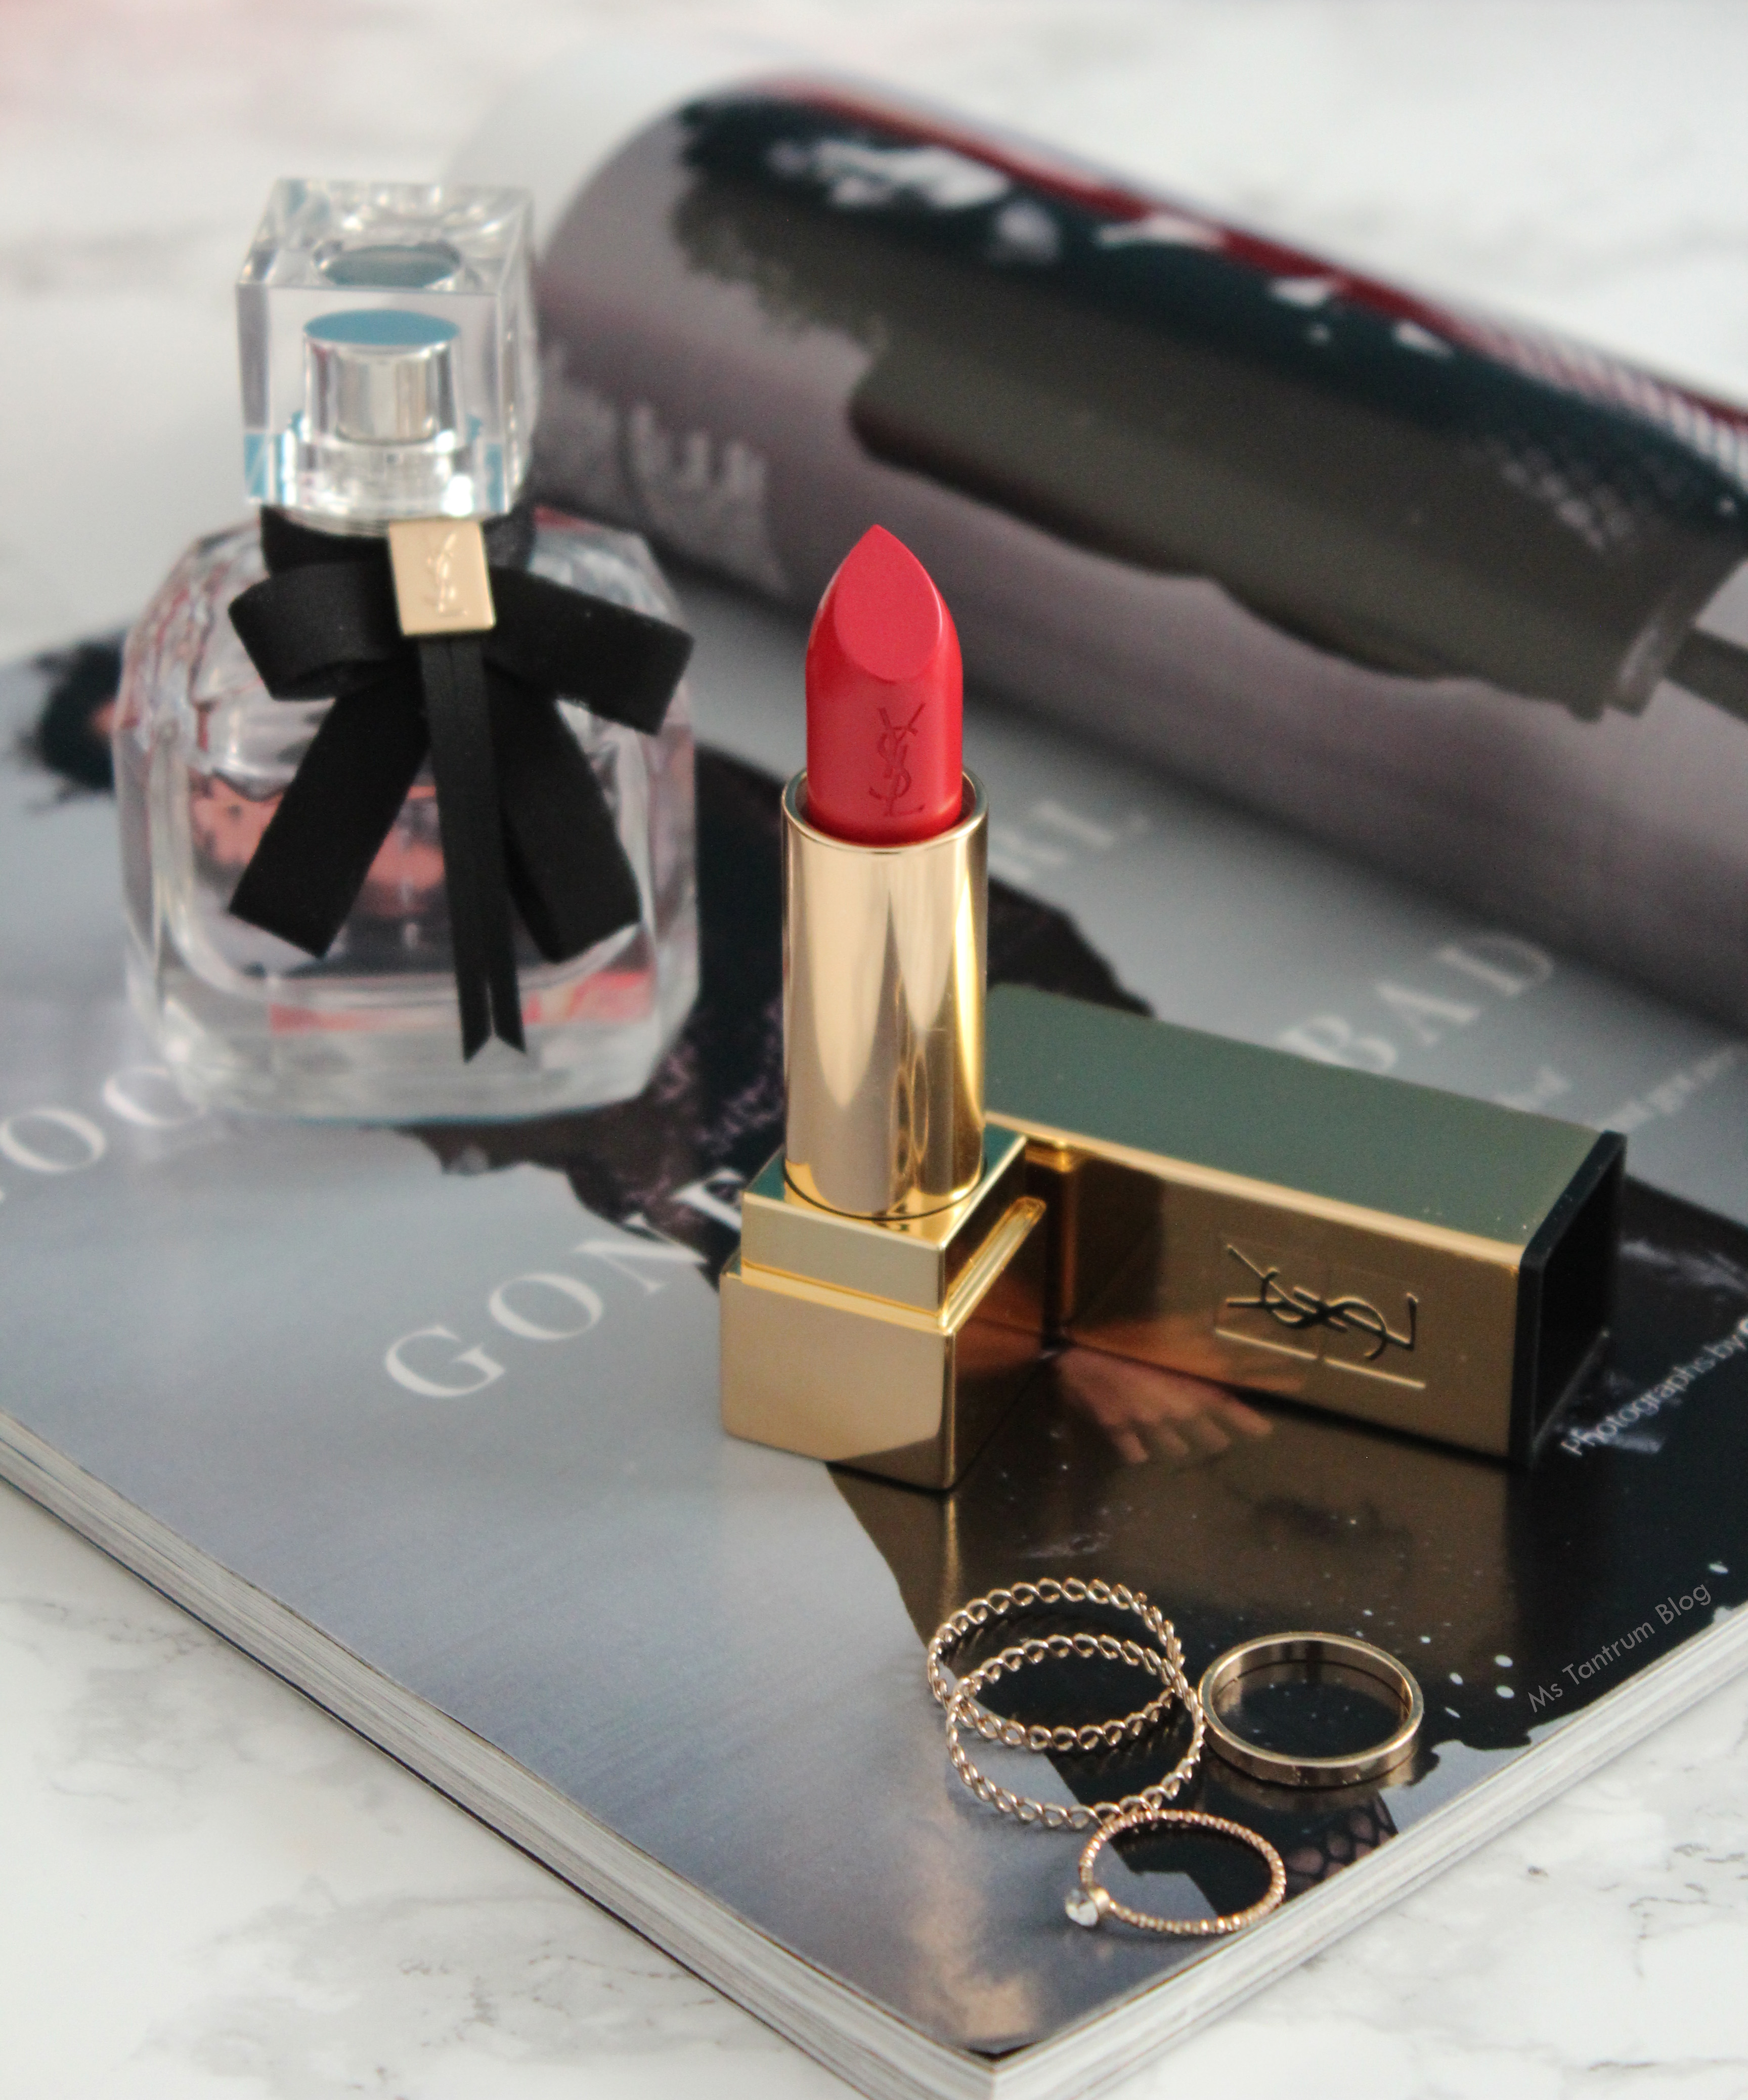 YSL Rouge Pur Couture - ROuge Rouxane